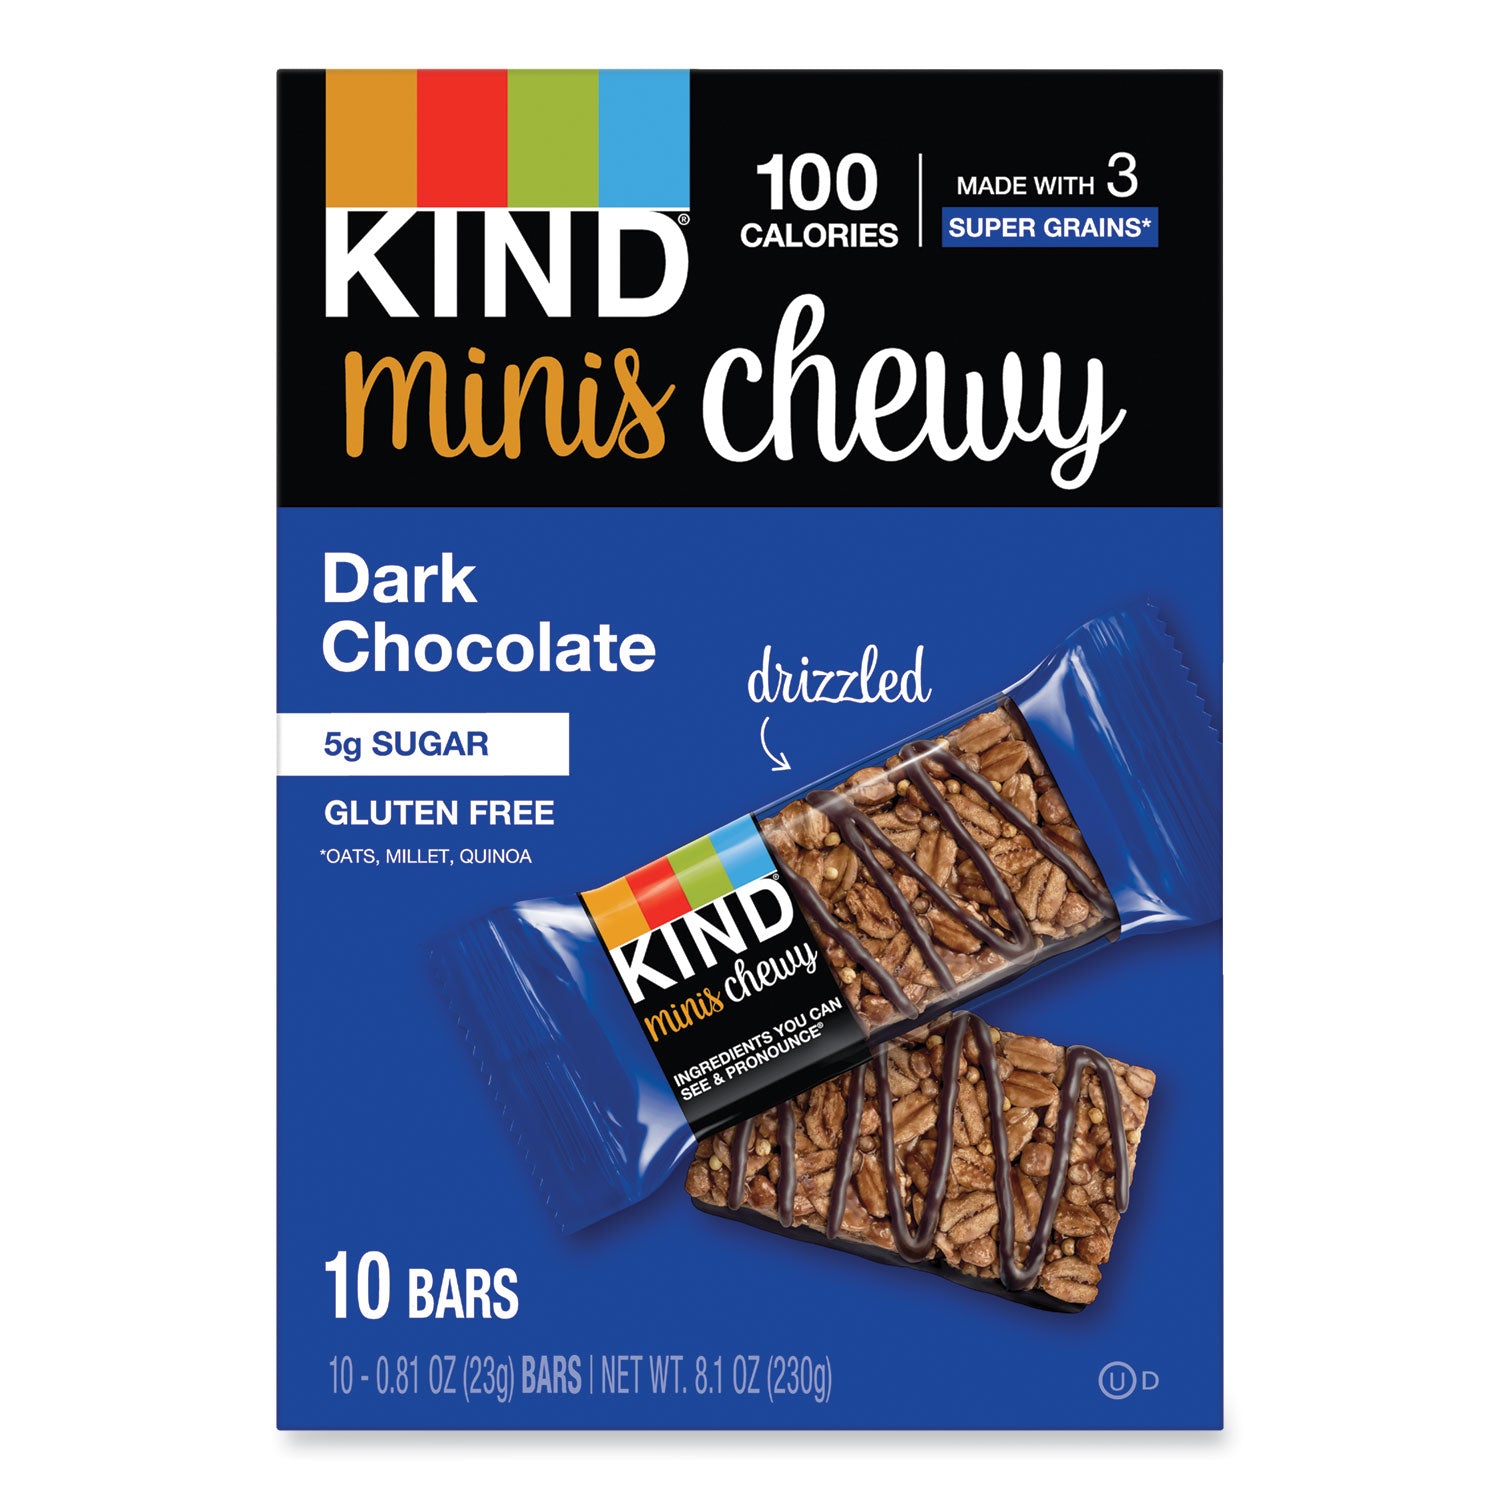 minis-chewy-dark-chocolate-081-oz10-pack_knd27896 - 1